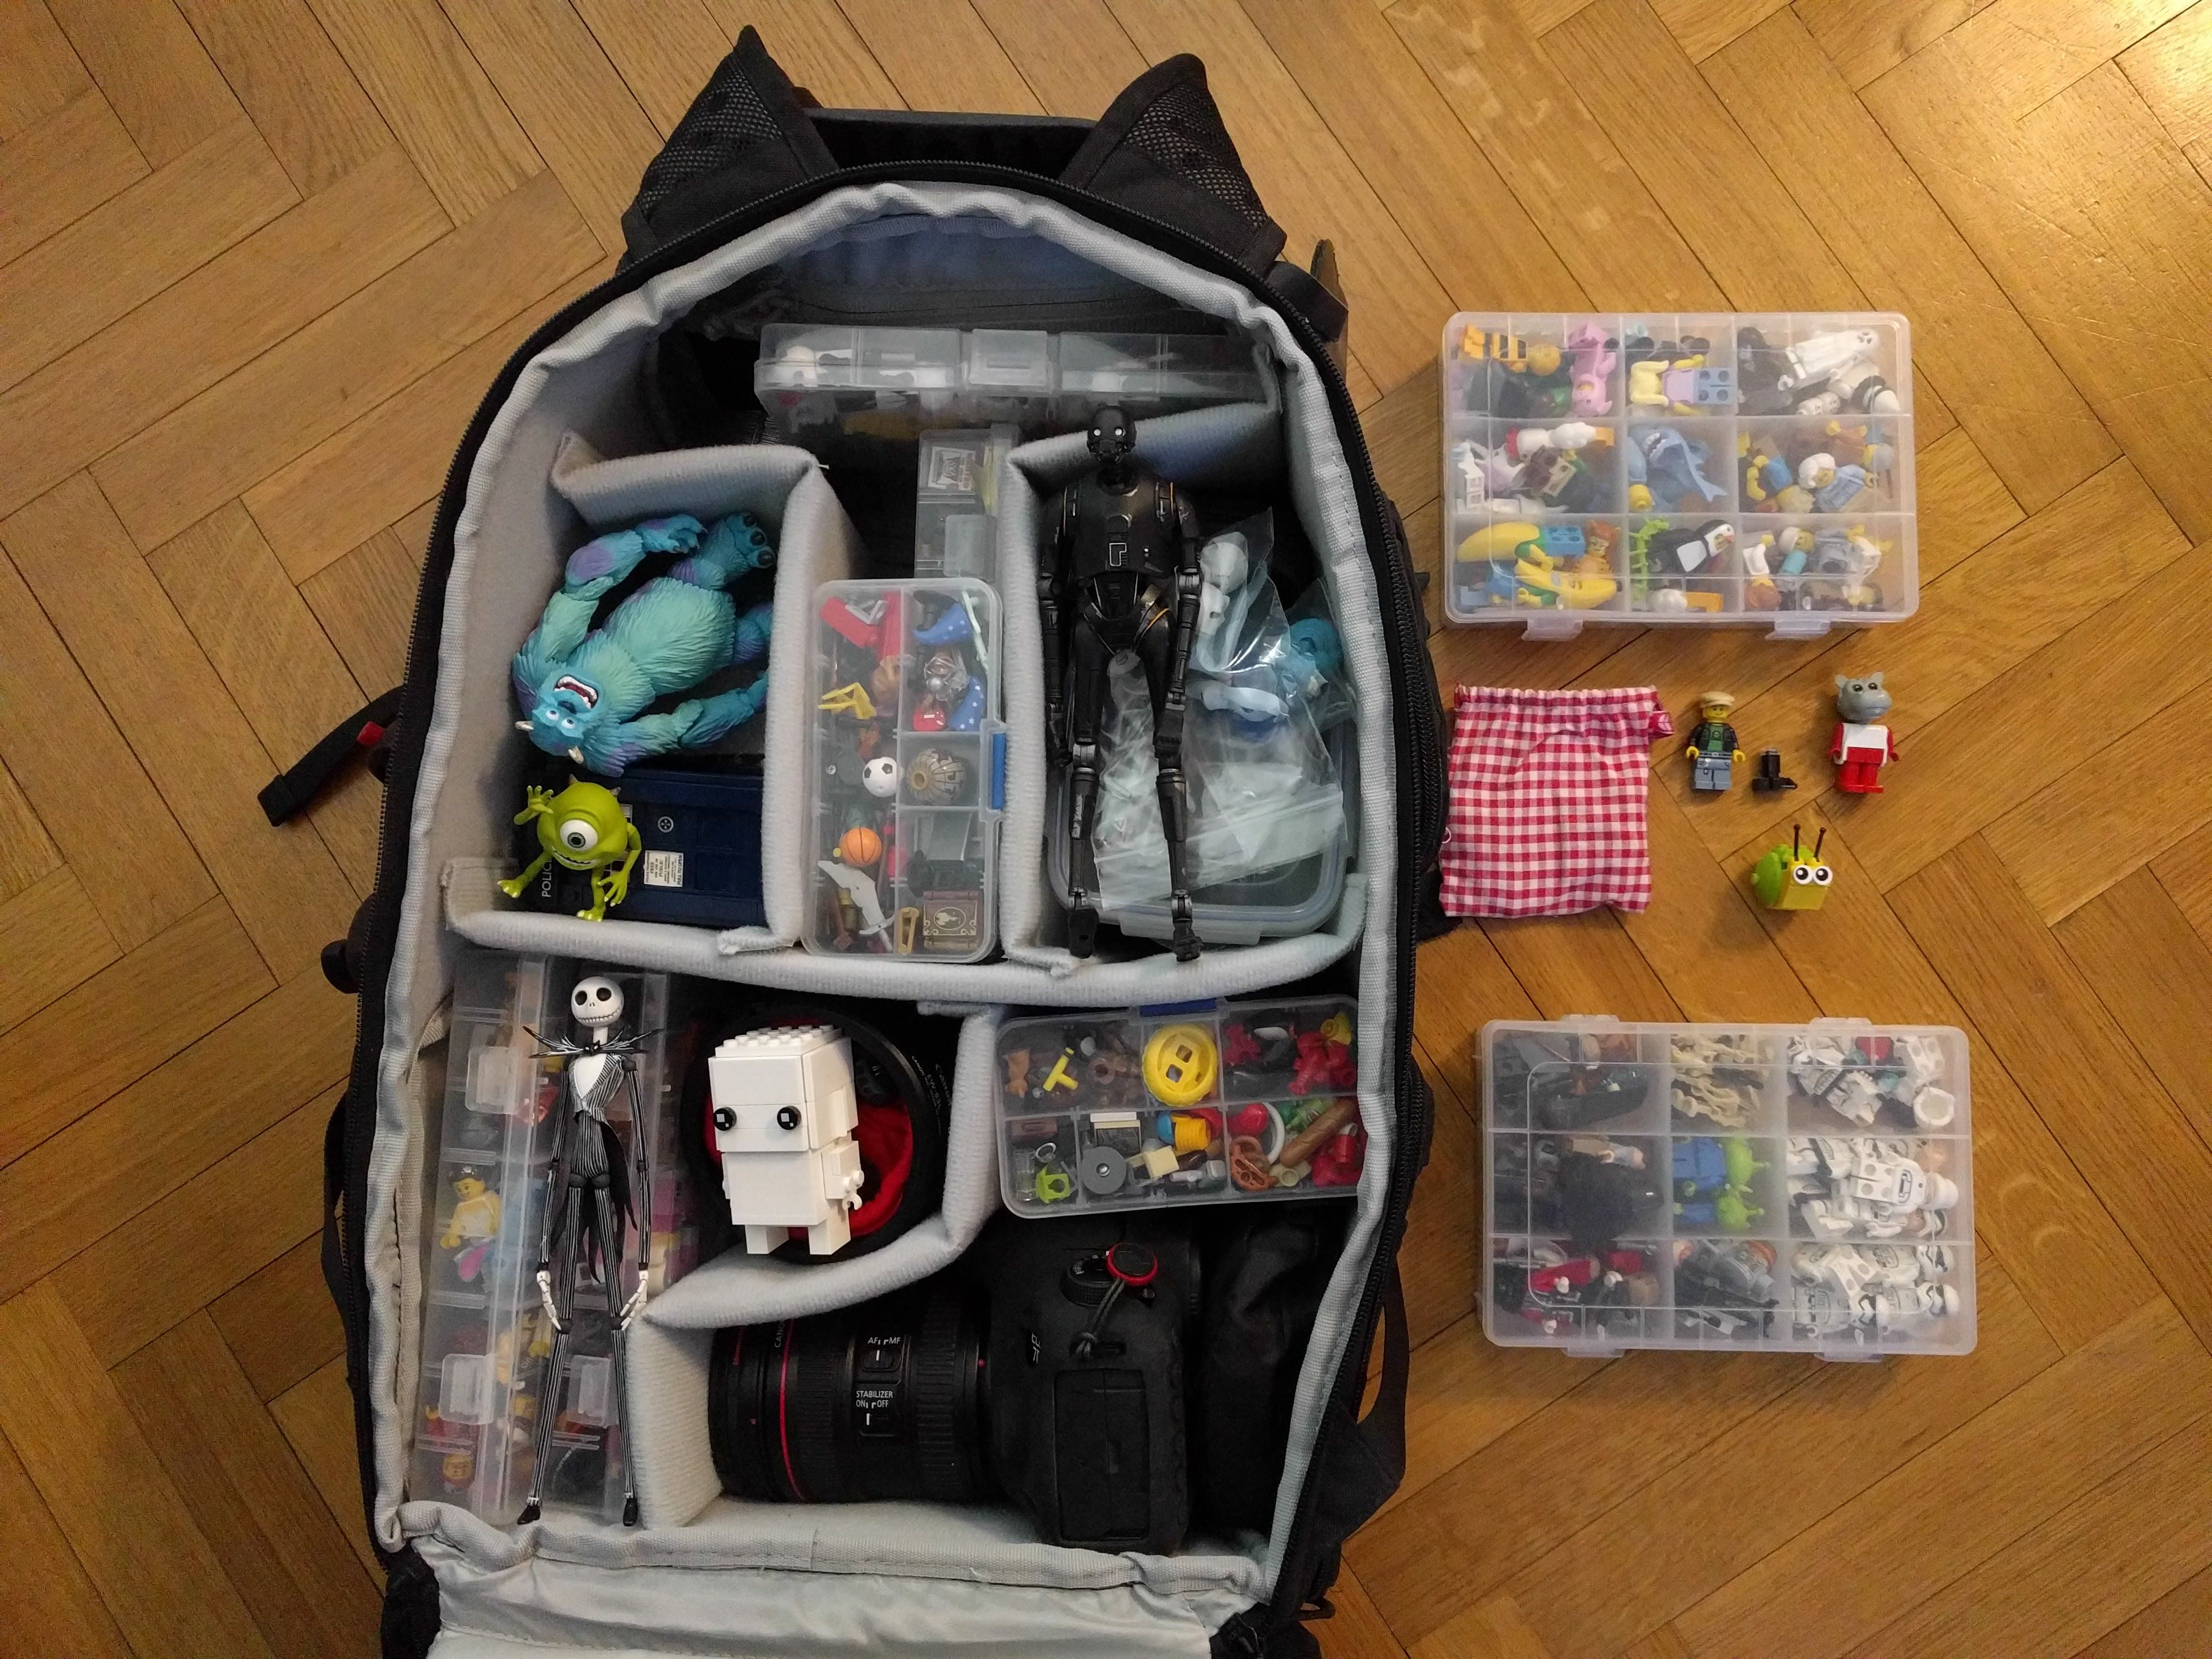 Caption: A photo of an open backpack on the floor filled with clear plastic cases of toys and figures as well as a DSLR camera. Next to the backpack are two clear plastic cases filled with LEGO minifigures. (Courtesy of Julien Ballester)